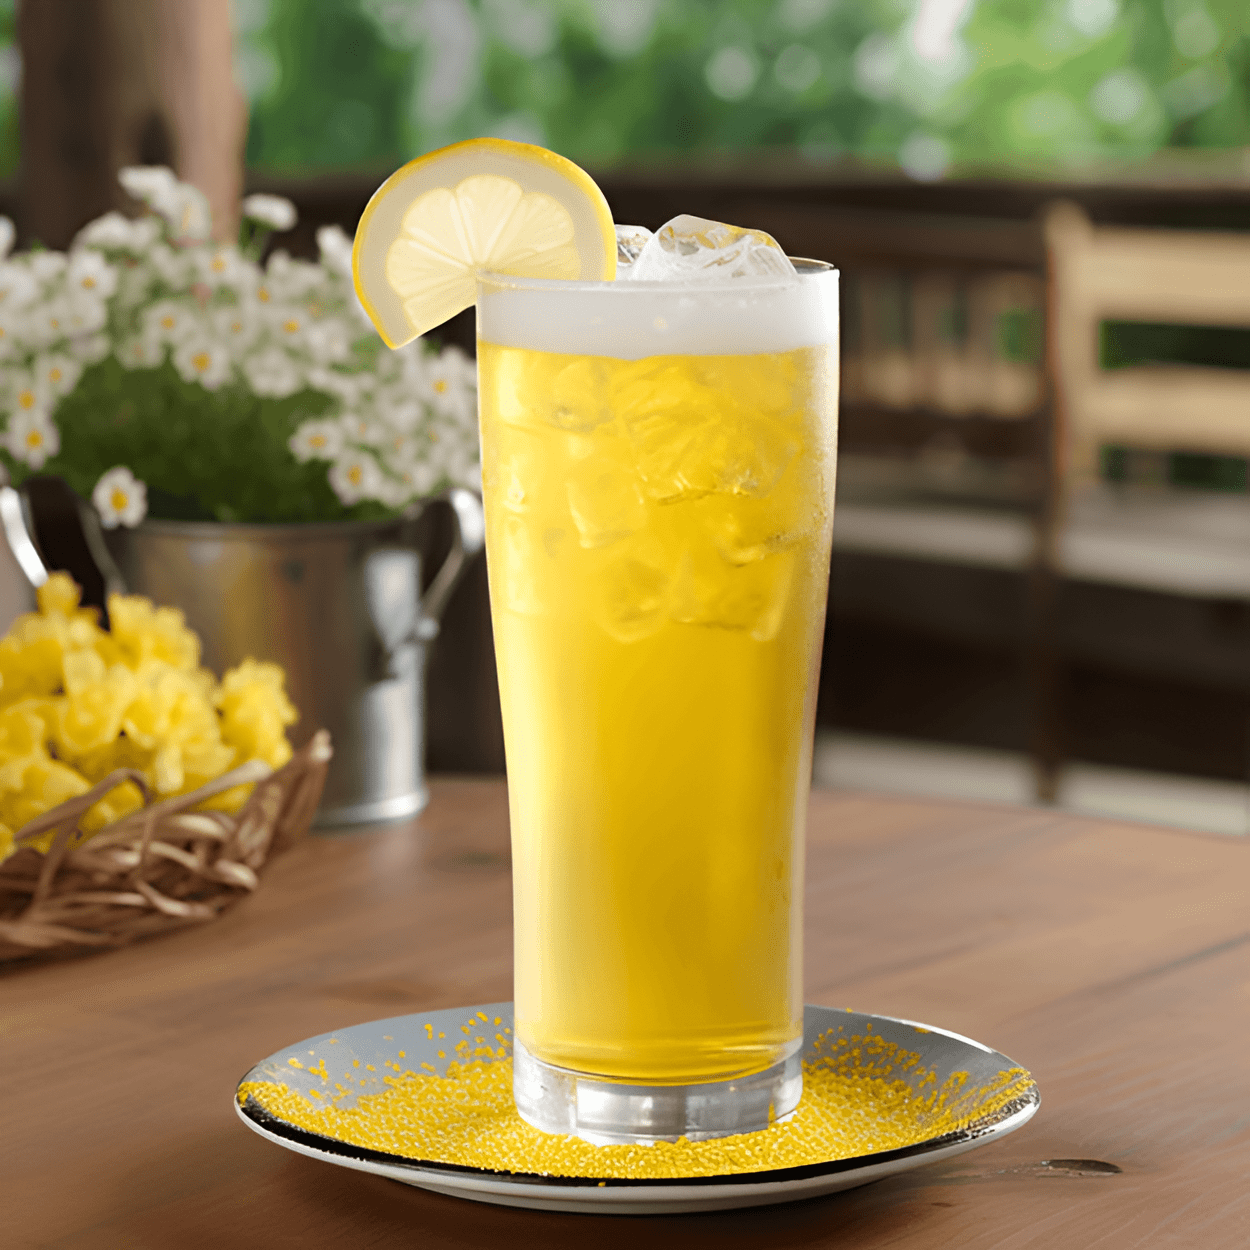 Porch Rocker Cocktail Recipe - The Porch Rocker is a delightful balance of sweet, sour, and bitter. The lemonade provides a refreshing citrusy tang, while the vodka adds a smooth, robust kick. The beer adds a subtle bitterness that balances out the sweetness of the lemonade.